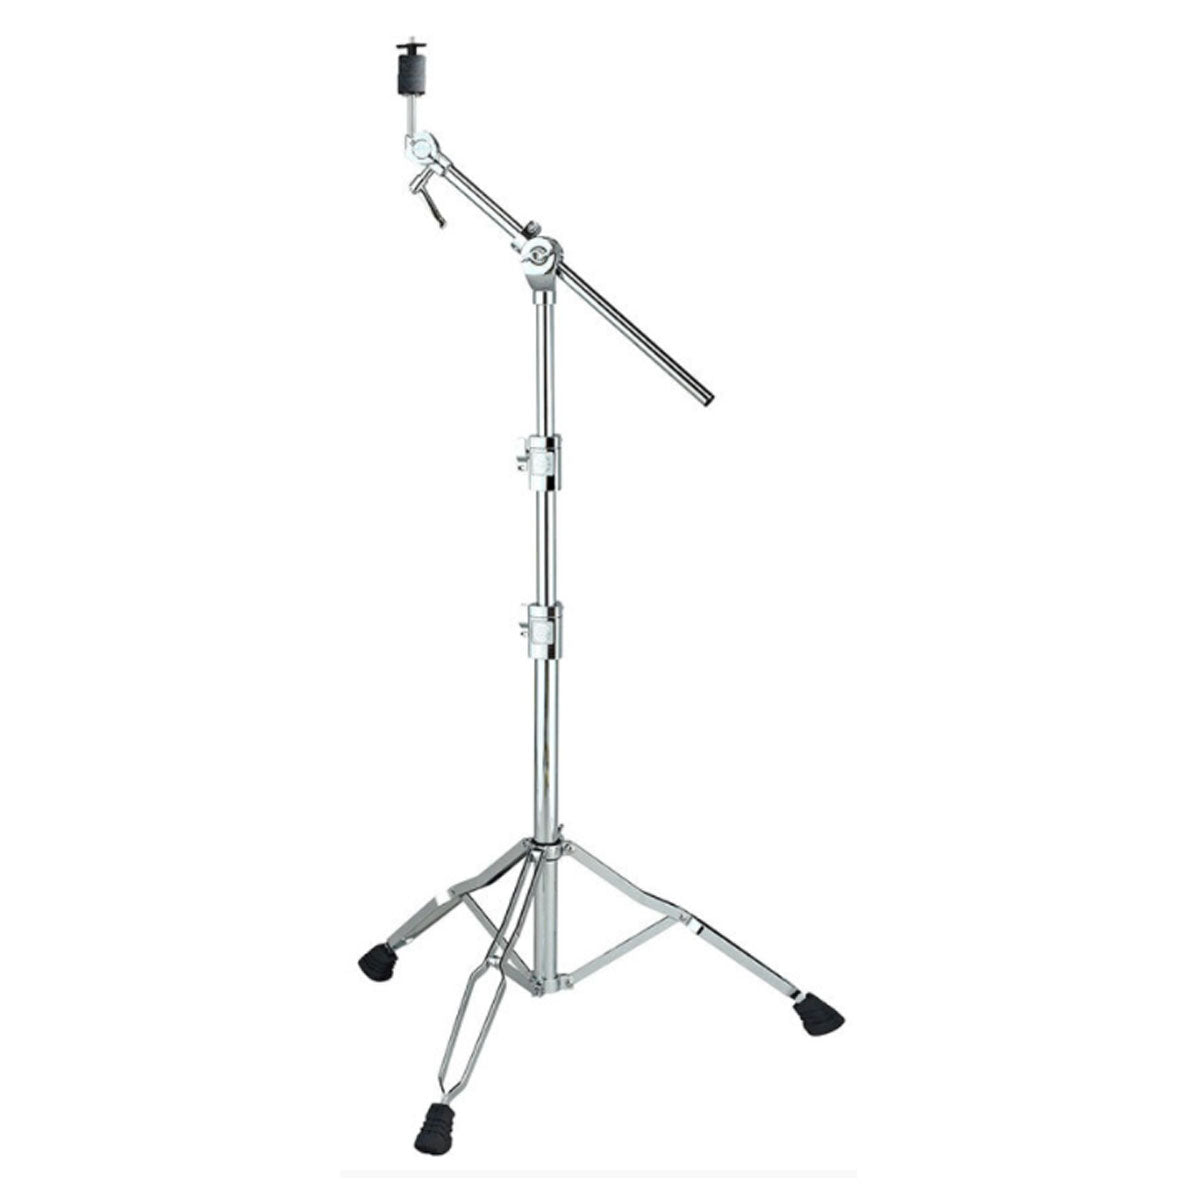 Dixon K Series Boom Cymbal Stand Heavy-Weight Double Braced - PSYK900IKS